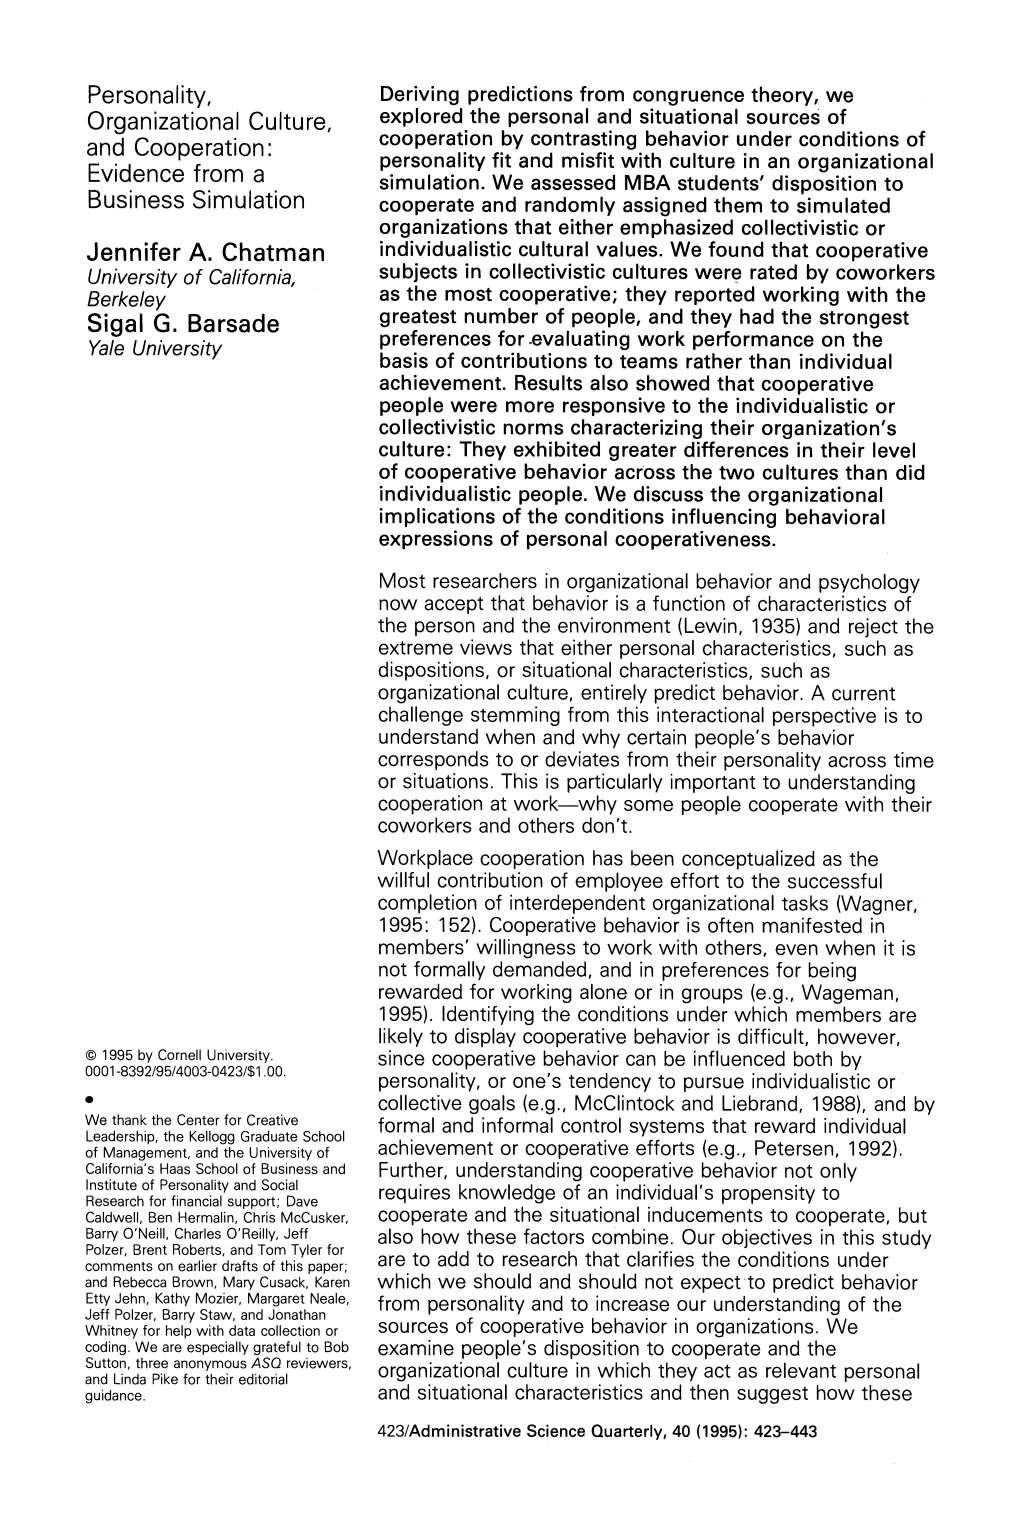 Personality, Organizational Culture, and Cooperation: Evidence